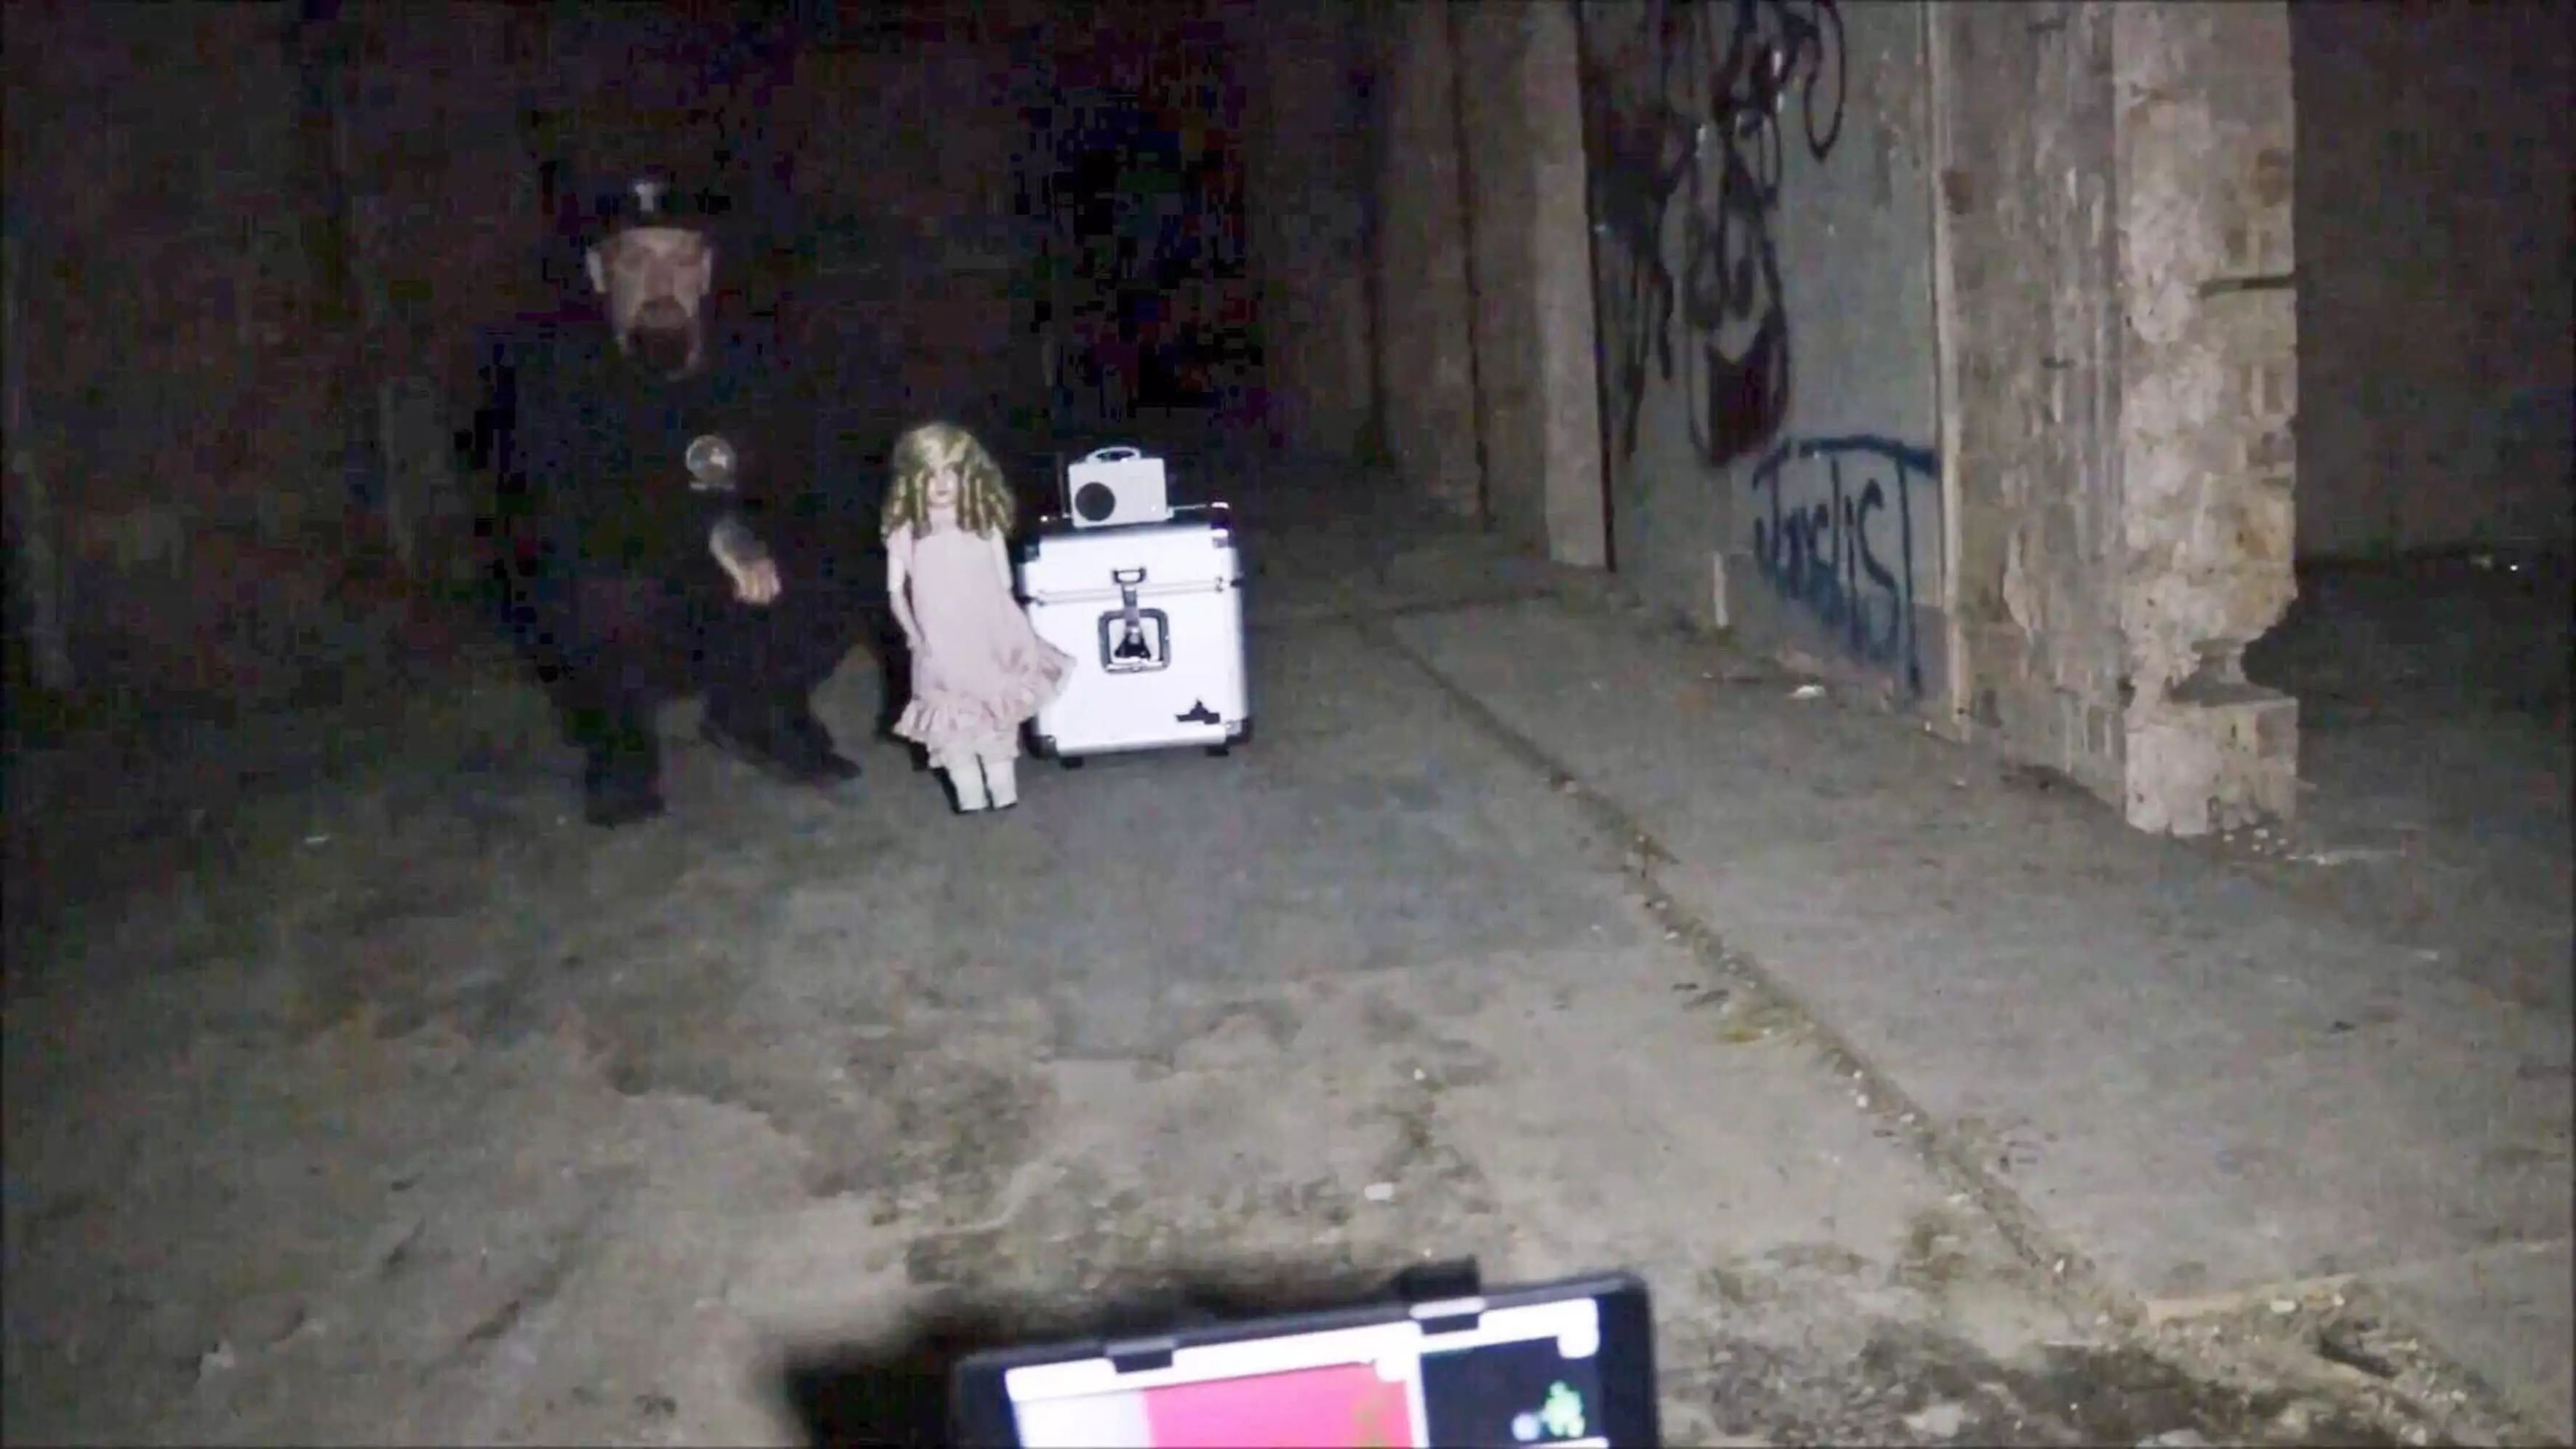 The doll's previous owner got in touch with paranormal investigator Miki York to take the doll.